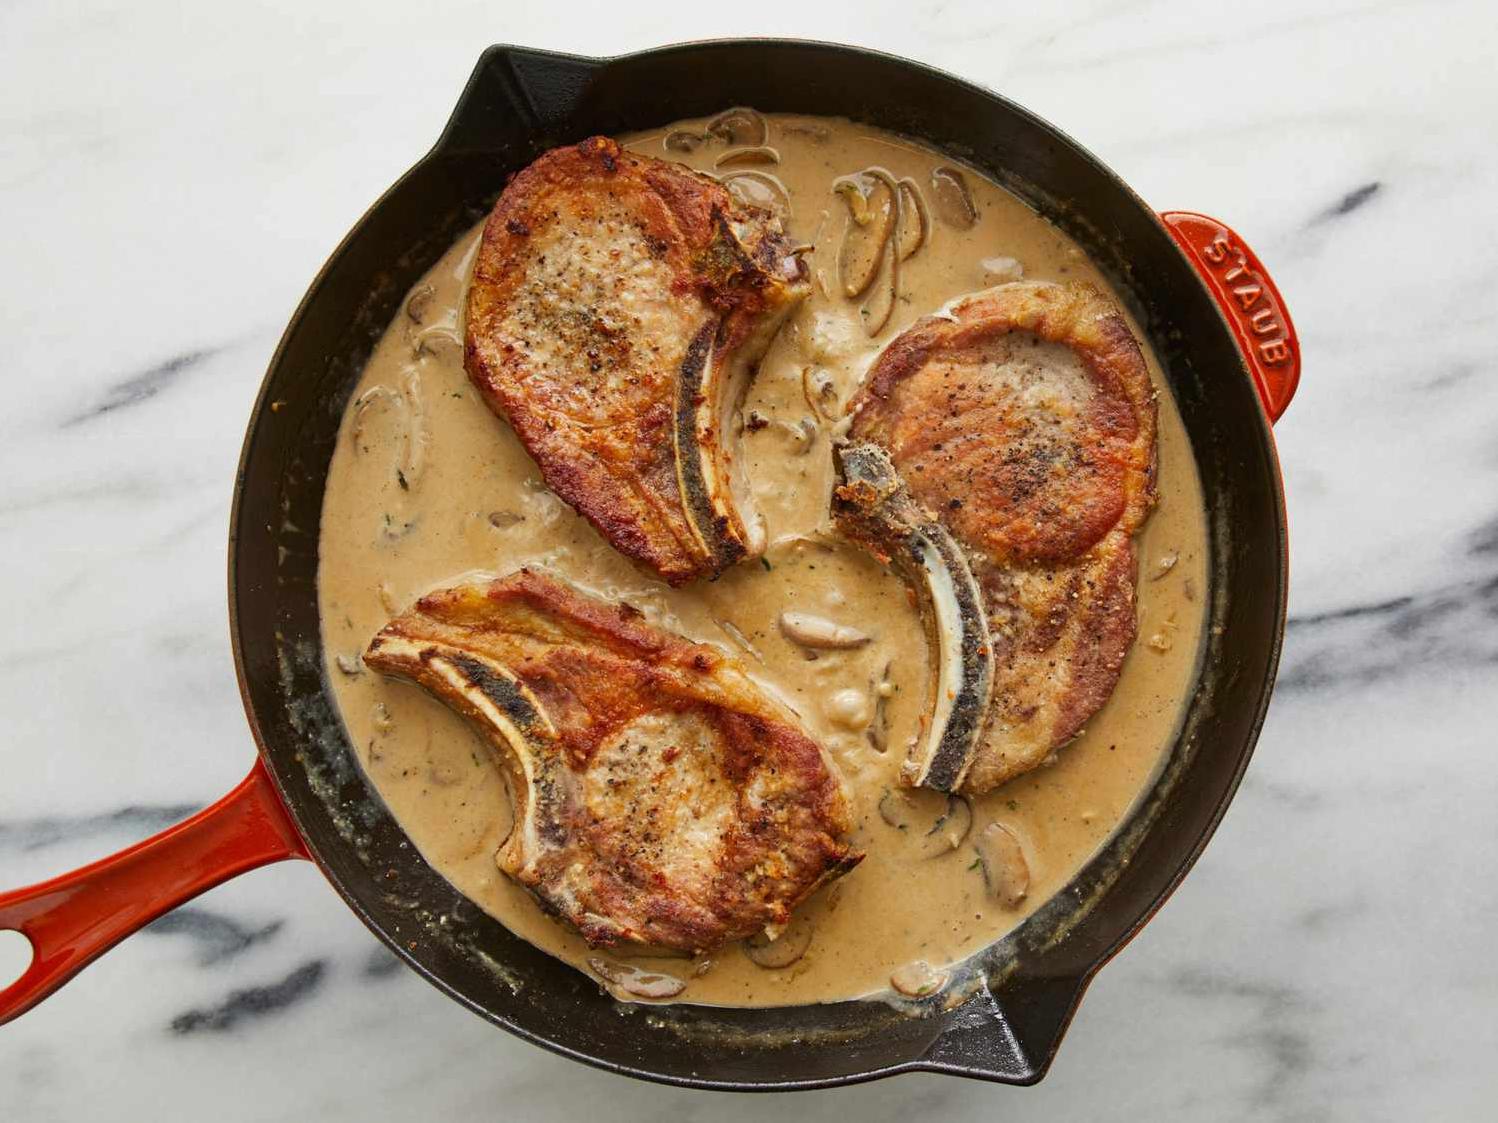  Tender pork chops smothered in a velvety gravy made from scratch